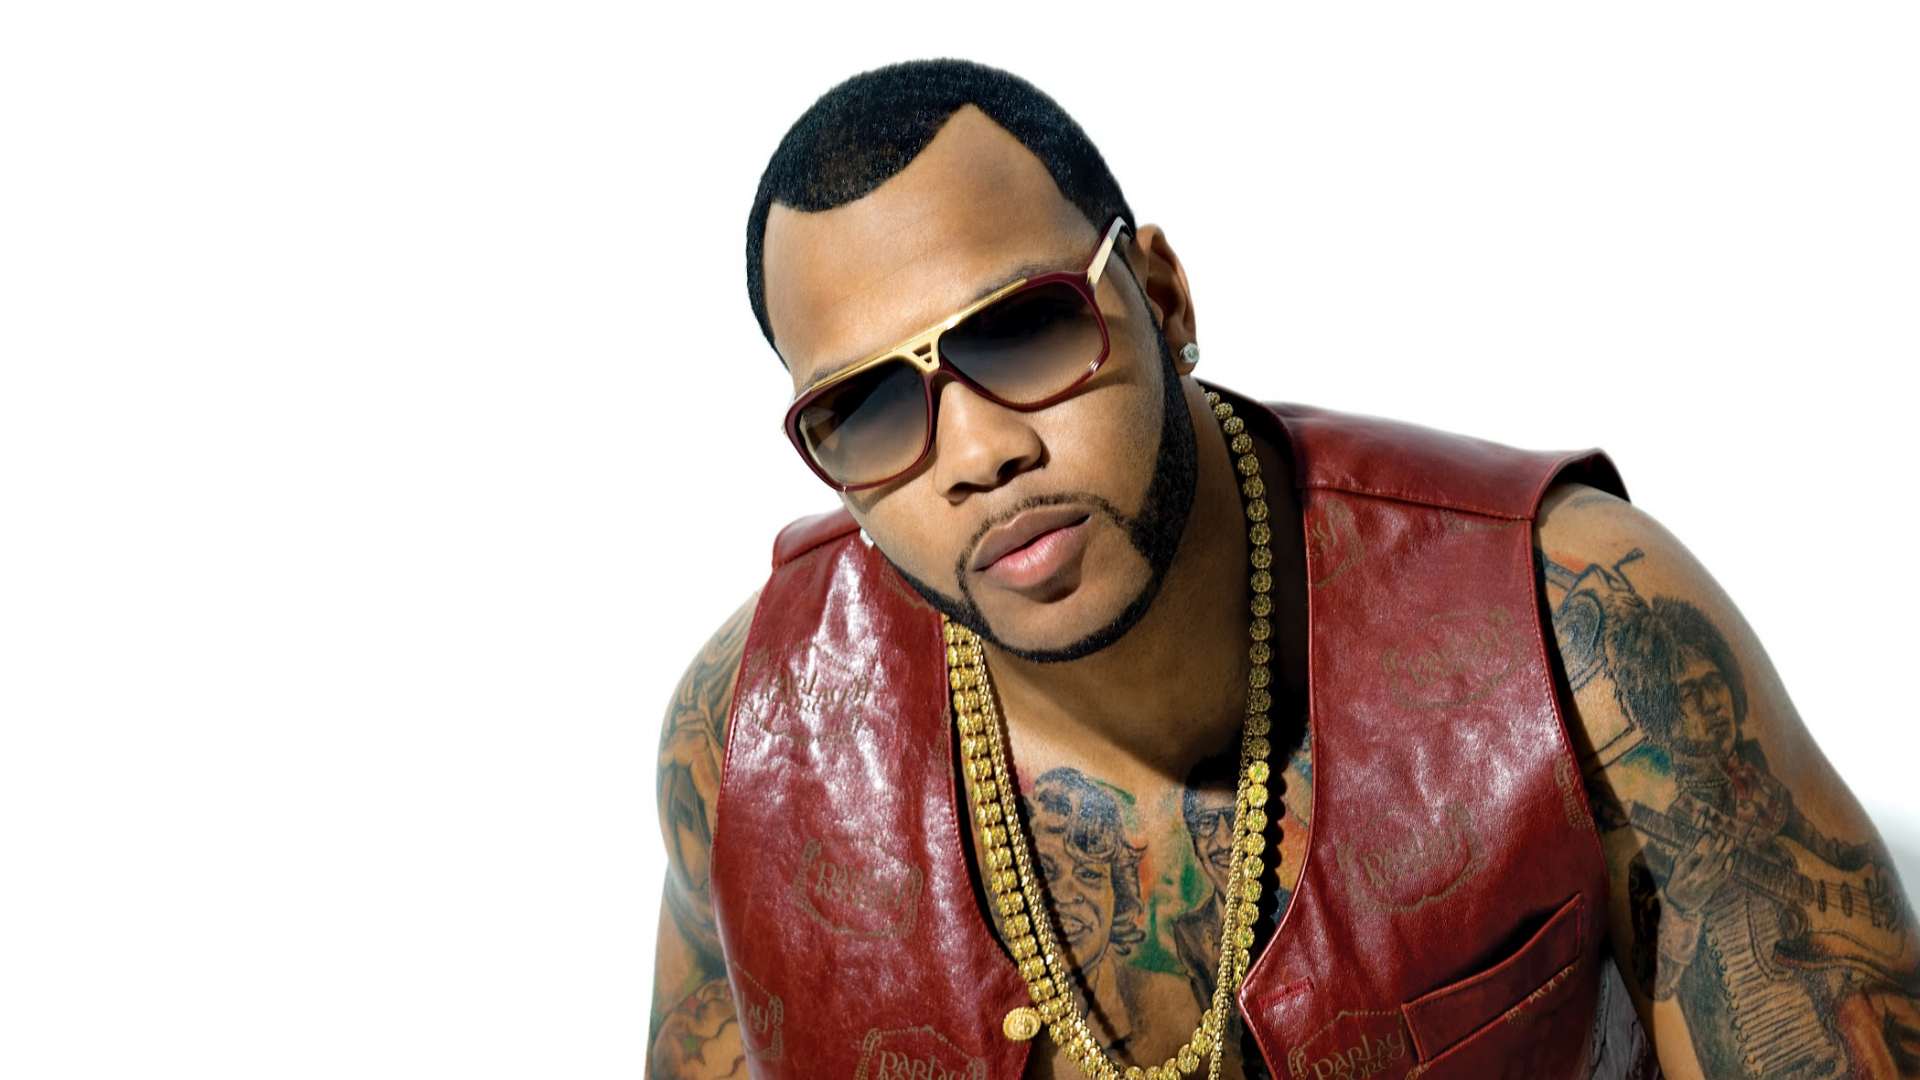 5 Flo Rida HD Wallpapers Backgrounds - Wallpaper Abyss